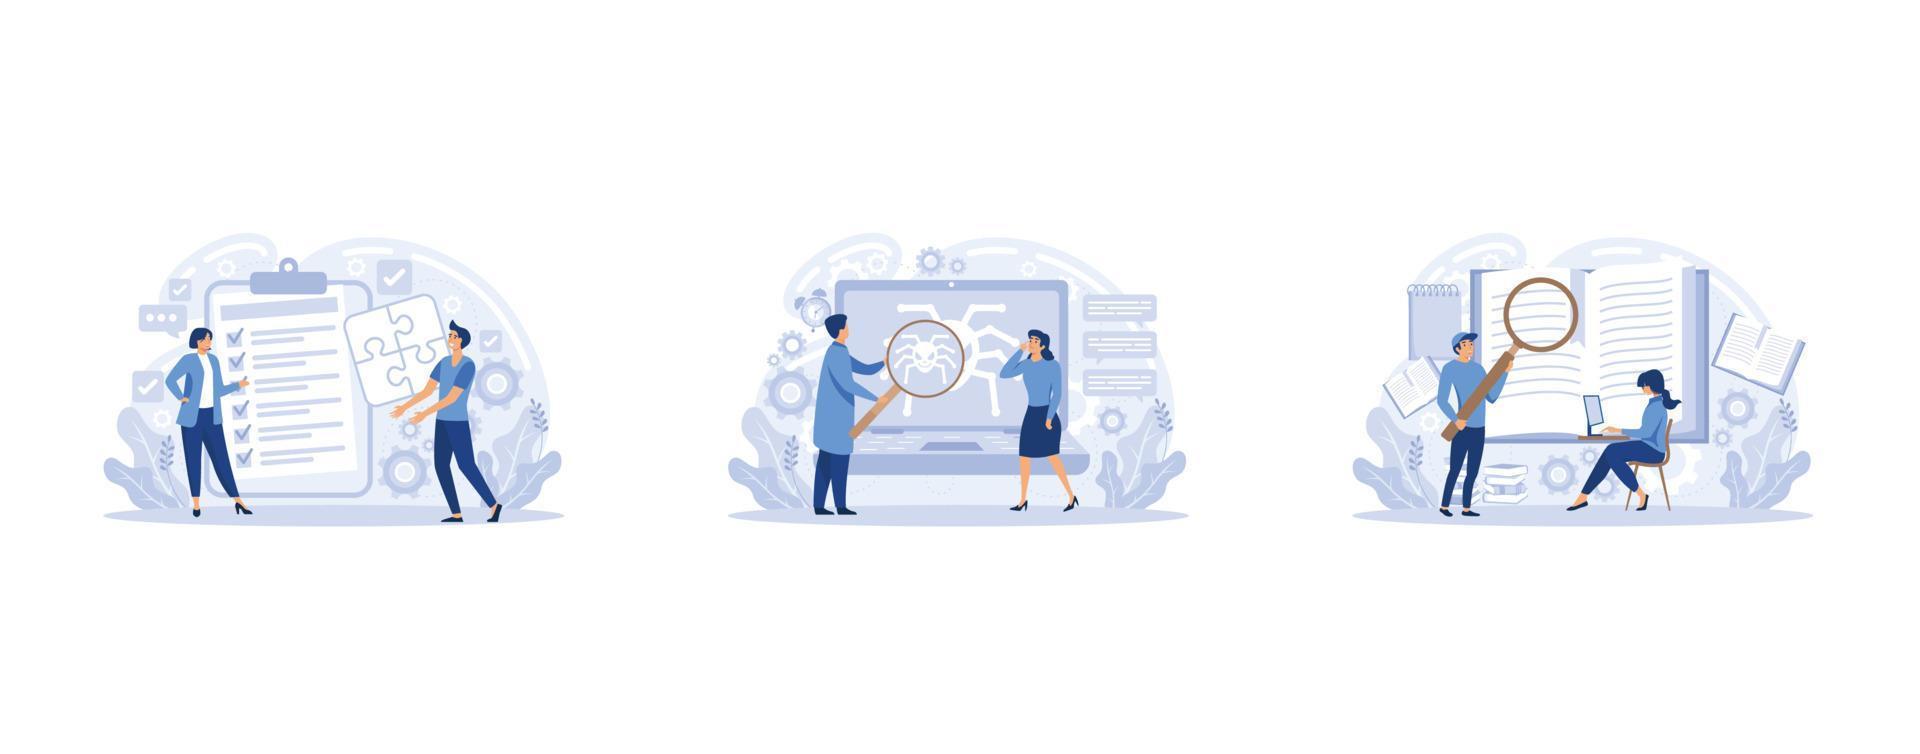 Customer experience, project delivery, beta testing, user guide, Software development, new product launch, technical helpdesk, set flat vector modern illustration